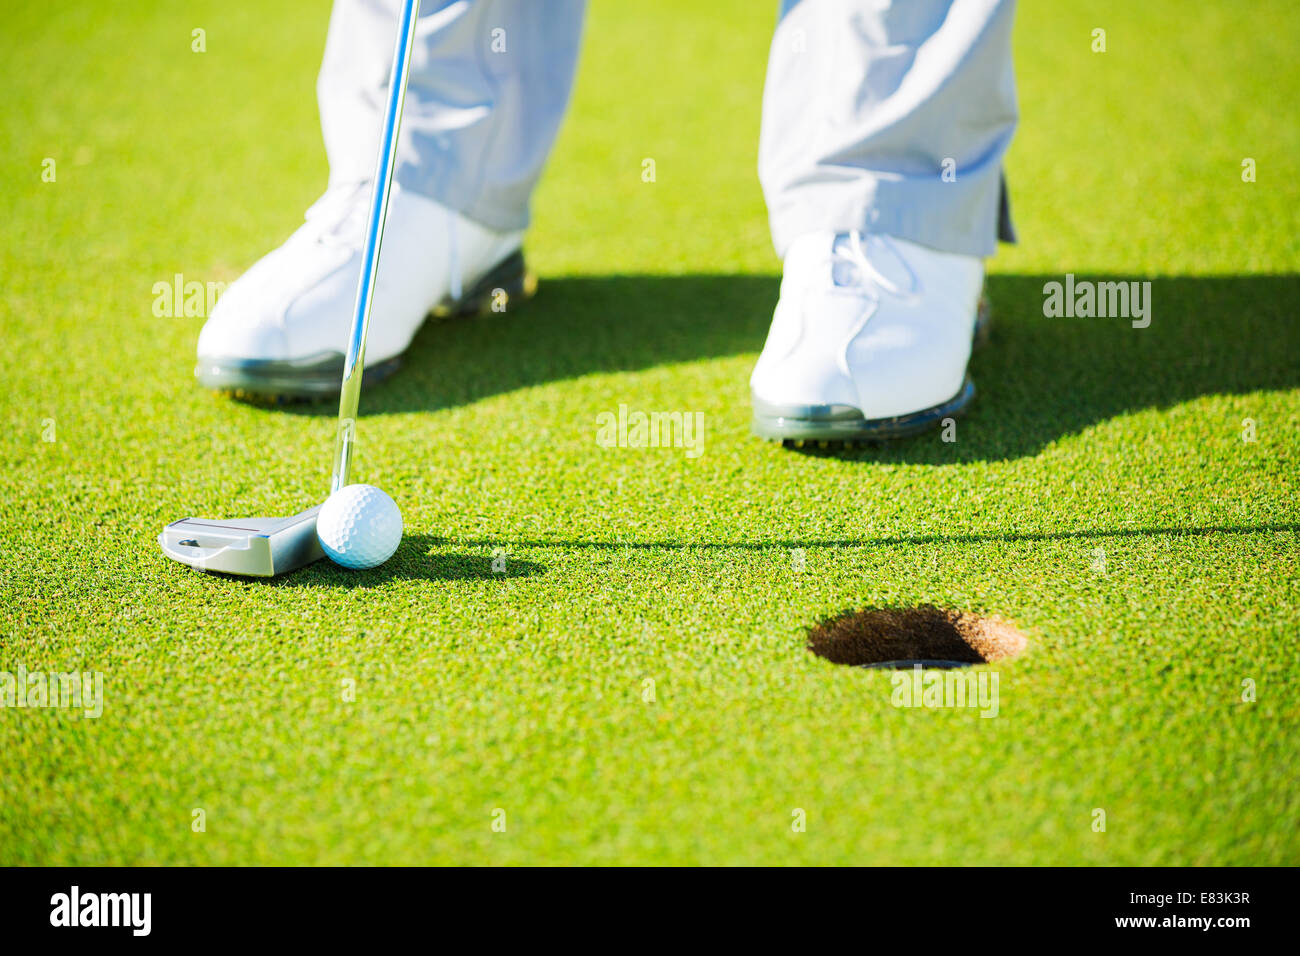 Man Putting Golf Ball into the Hole, Close up detail Shot Stock Photo